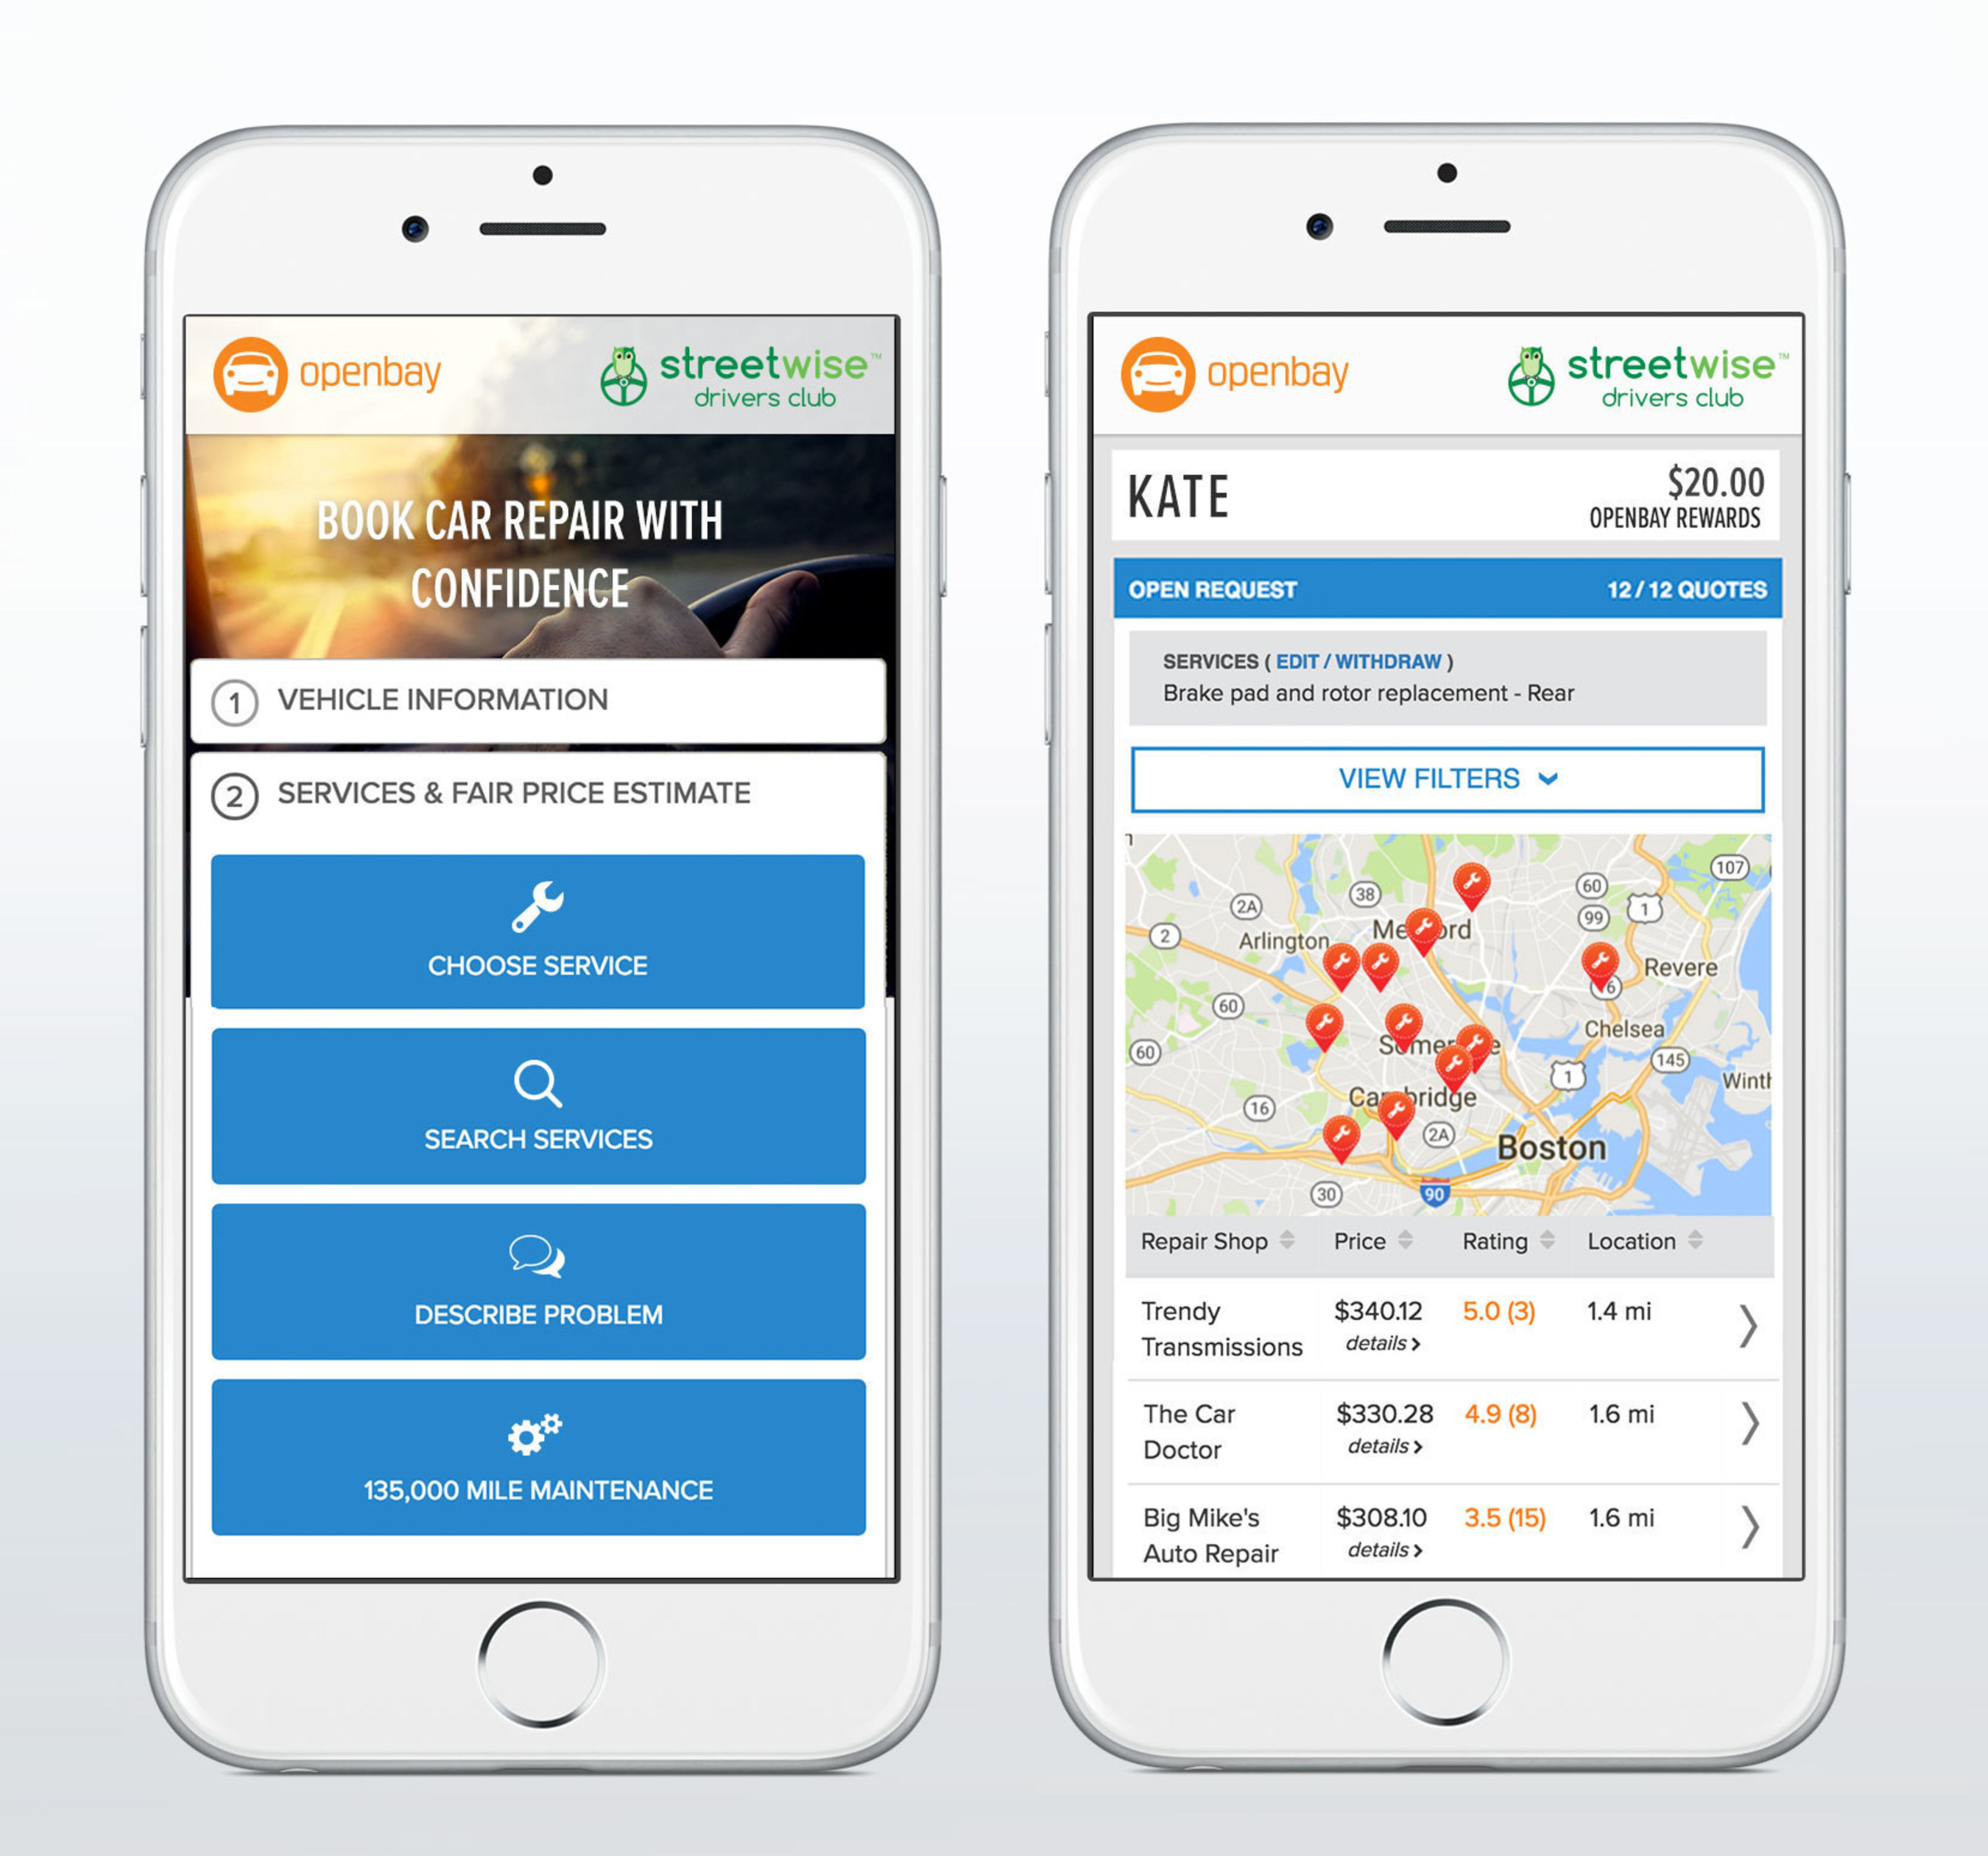 Streetwise Drivers Club App Now Features Openbay Auto Repair Marketplace